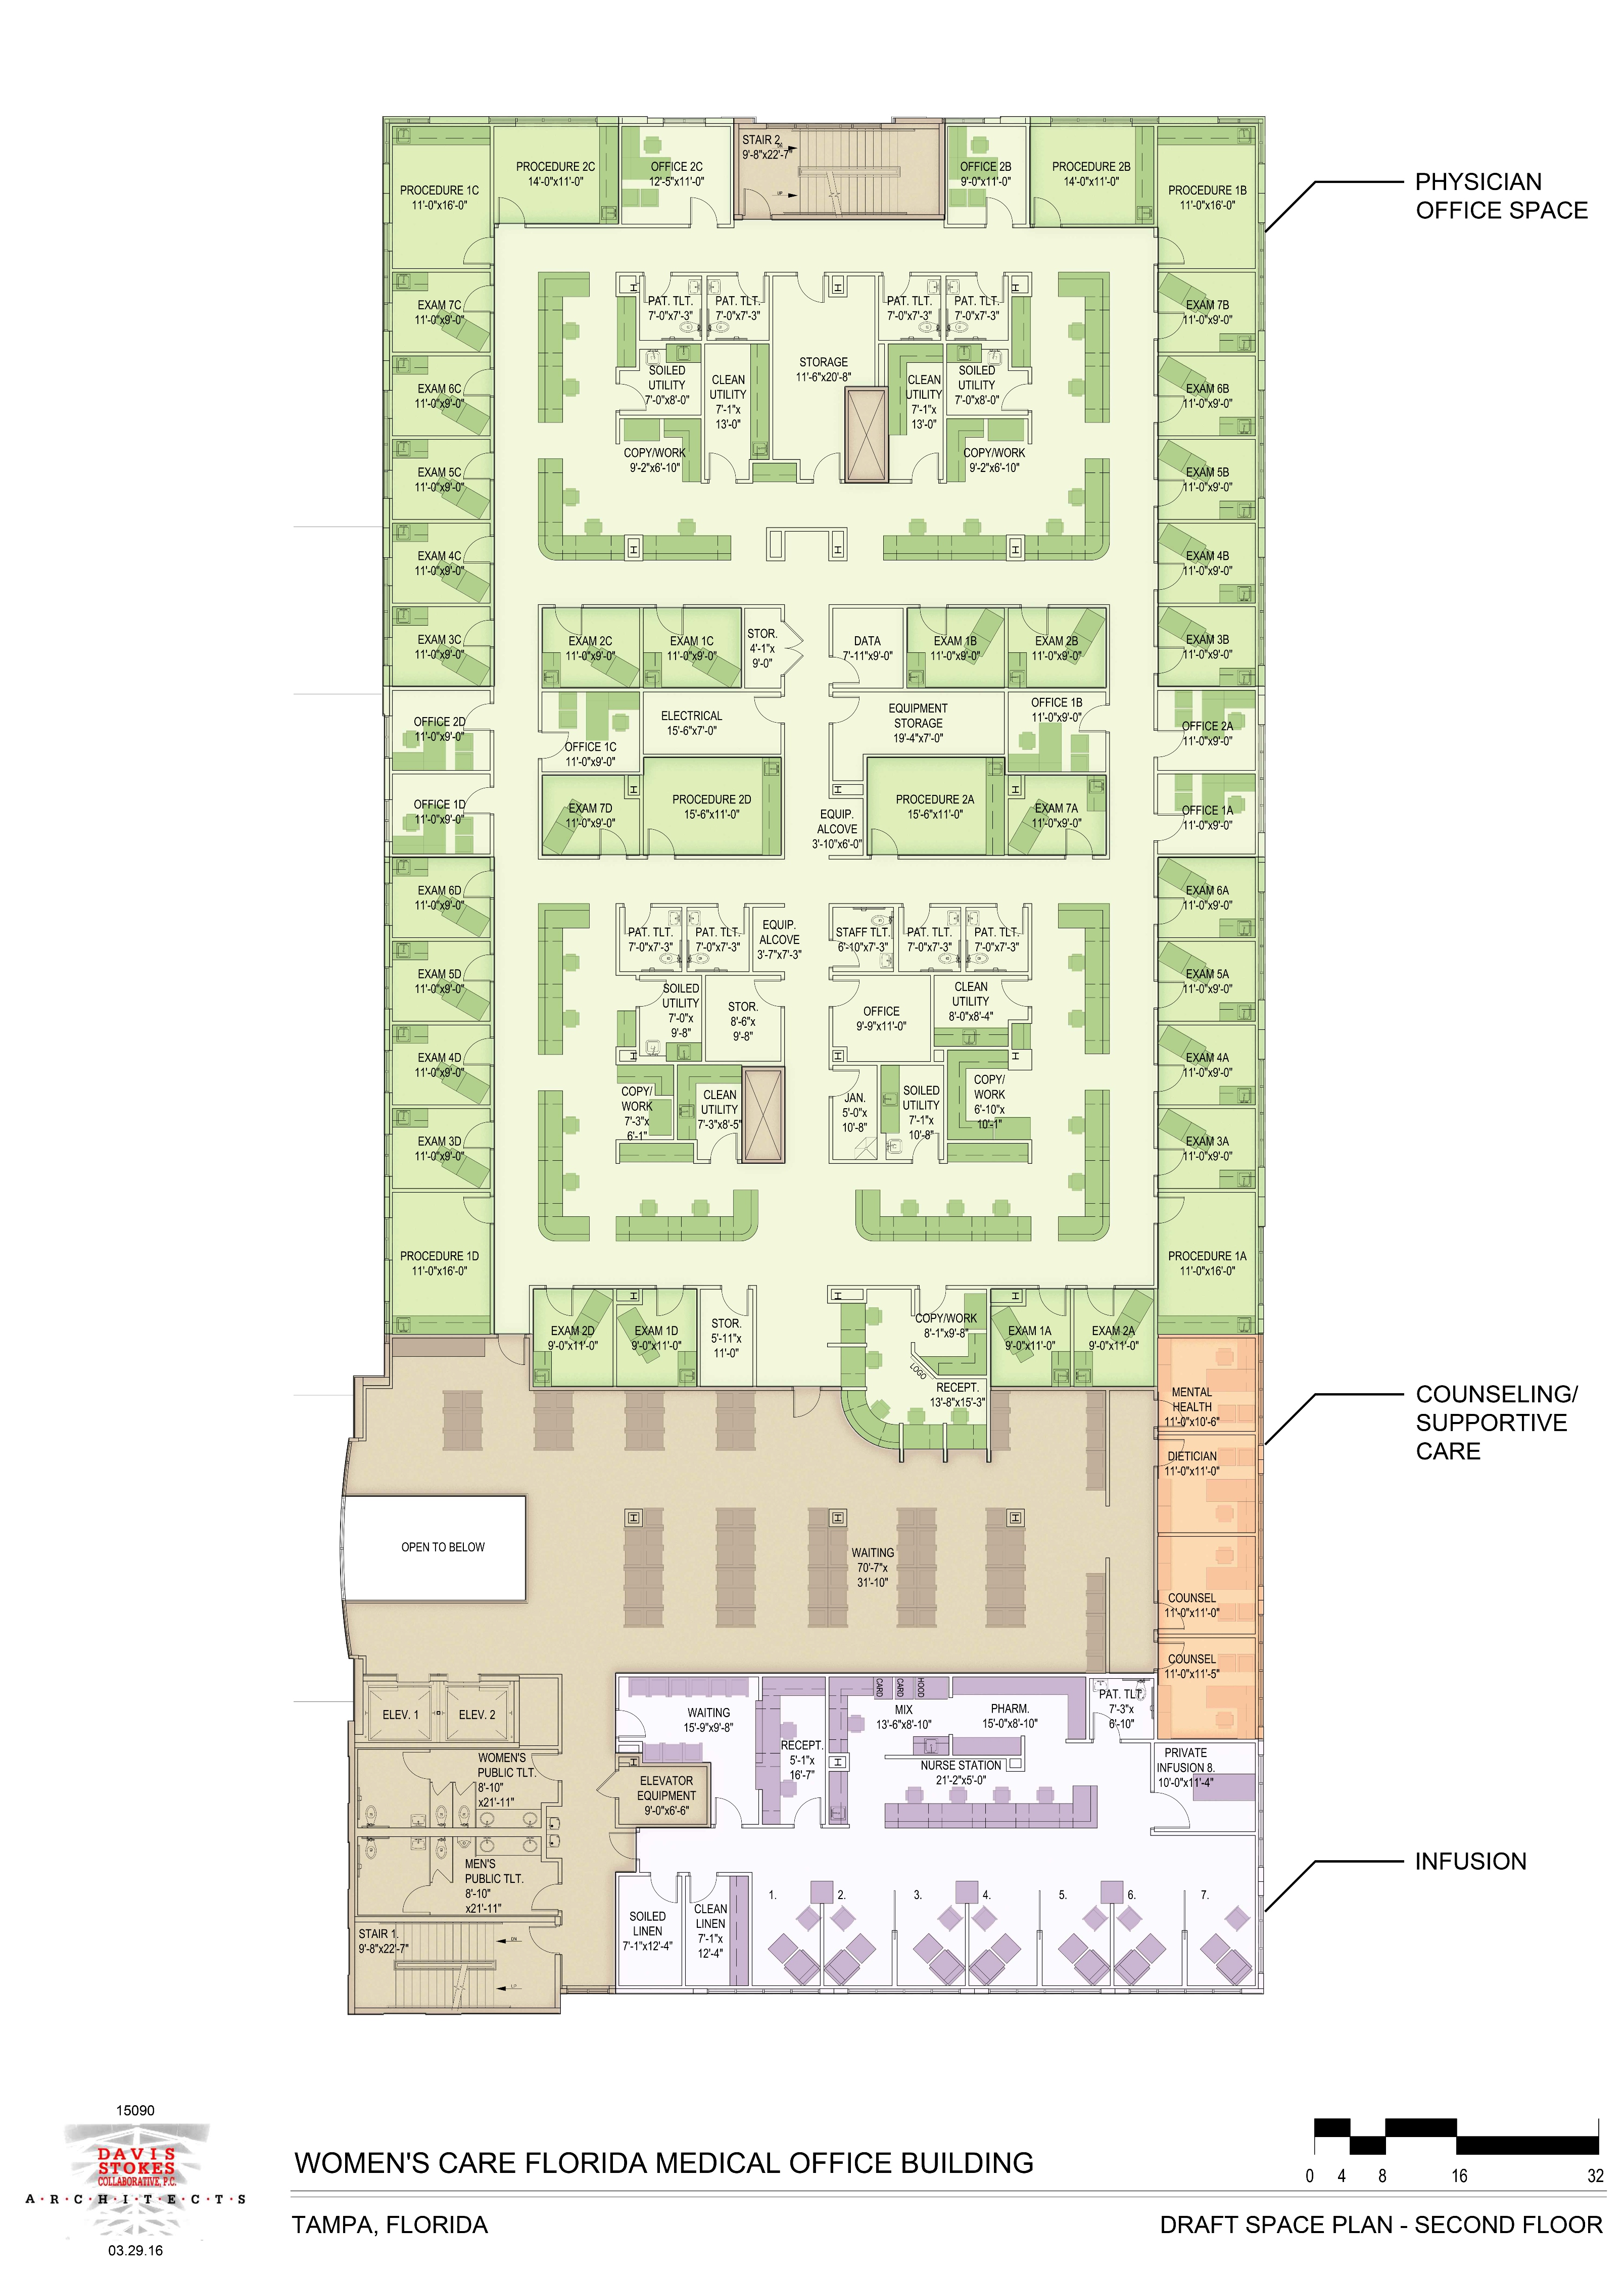 As shown in this partial floor plan, the new Women’s Health Center displays efficient programming and design features achieved by the NexCore team.